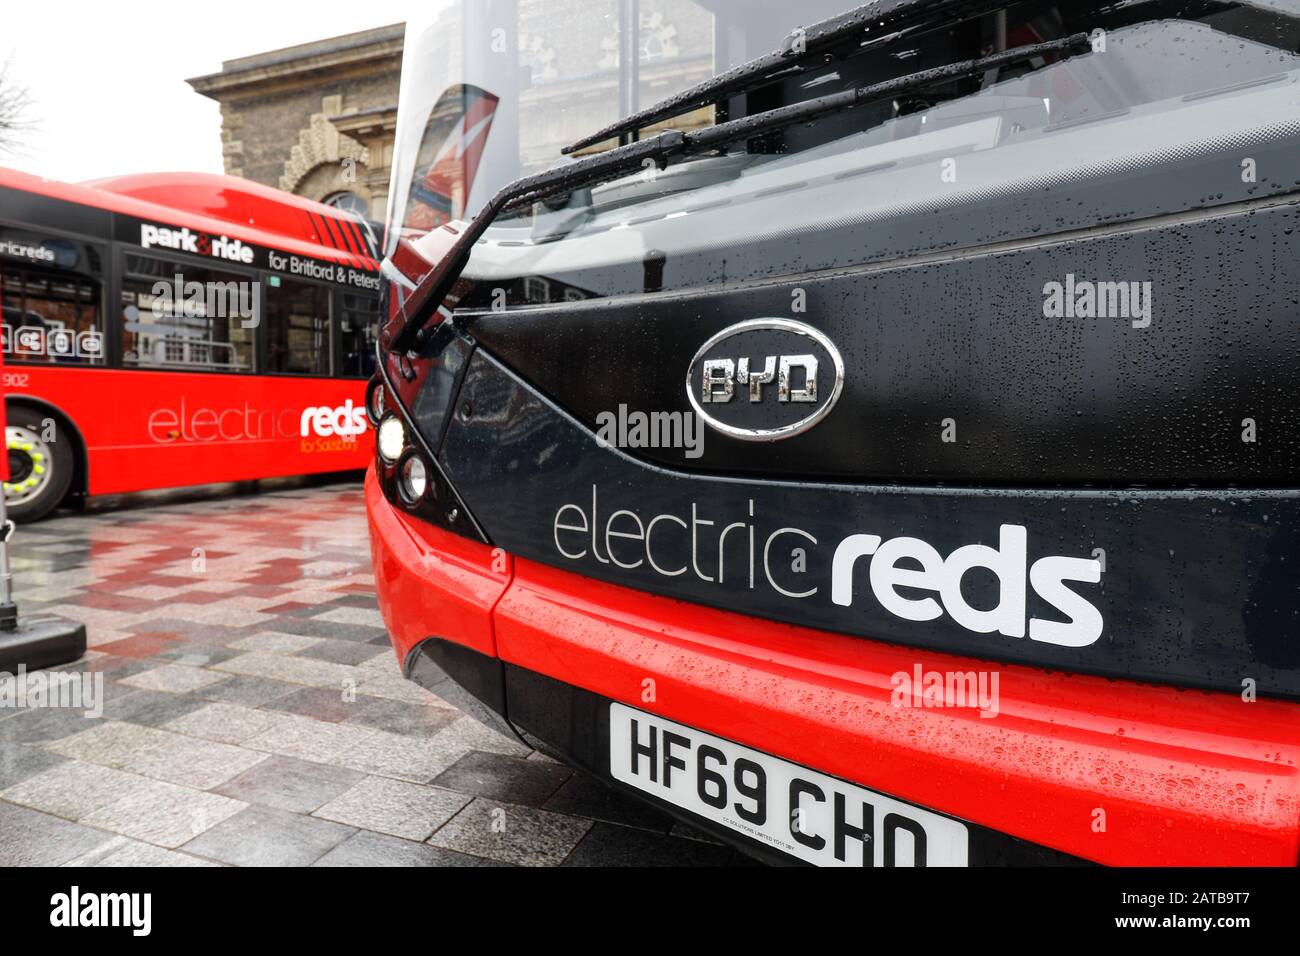 Salisbury Reds Electric Bus Launch at Salisbury Guildhall, 30th January 2020.  A total investment of £1.2 million paved the way for the latest additions to the city’s park and ride services, following a successful bid by the local bus operator and Wiltshire Council for £600,000 of Government funding.  The move means greener and cleaner journeys across the region.  Salisbury Reds is part of Go South Coast Stock Photo